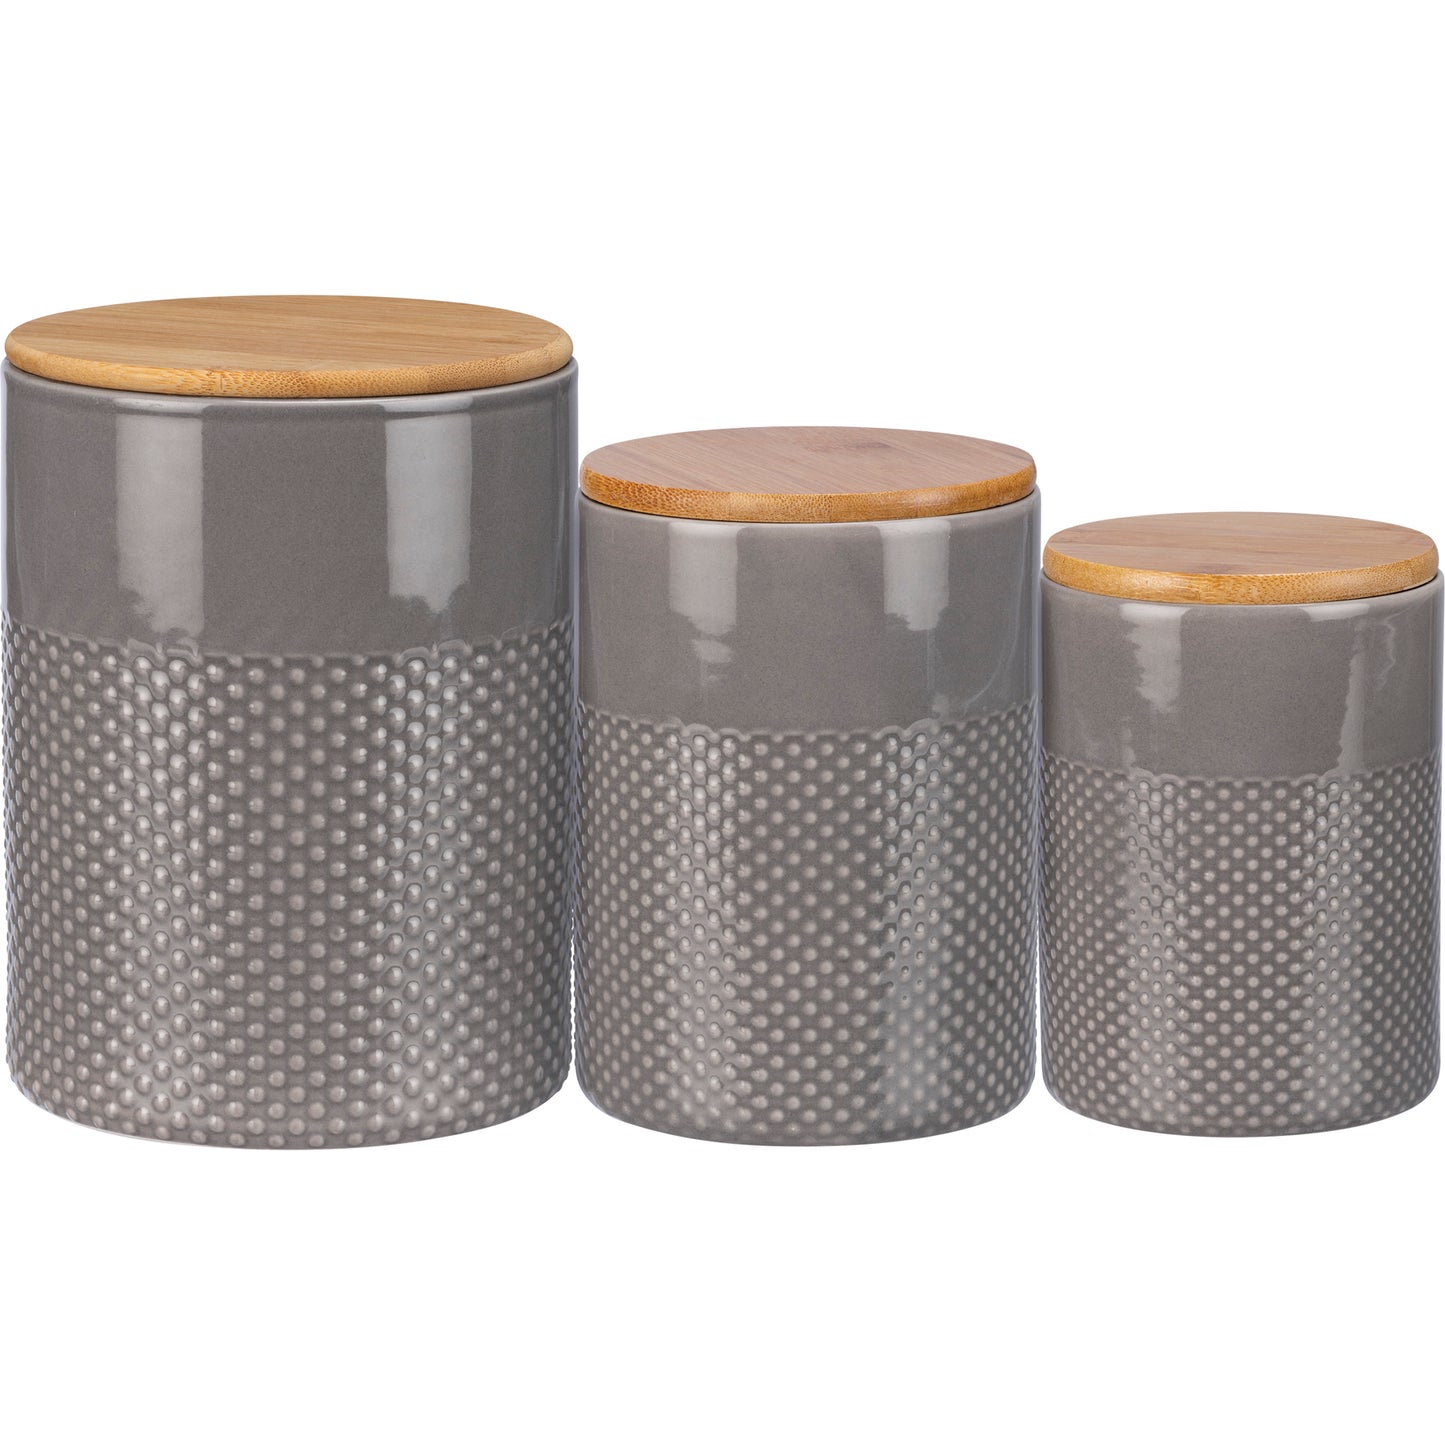 Farm Canisters - Set of 3